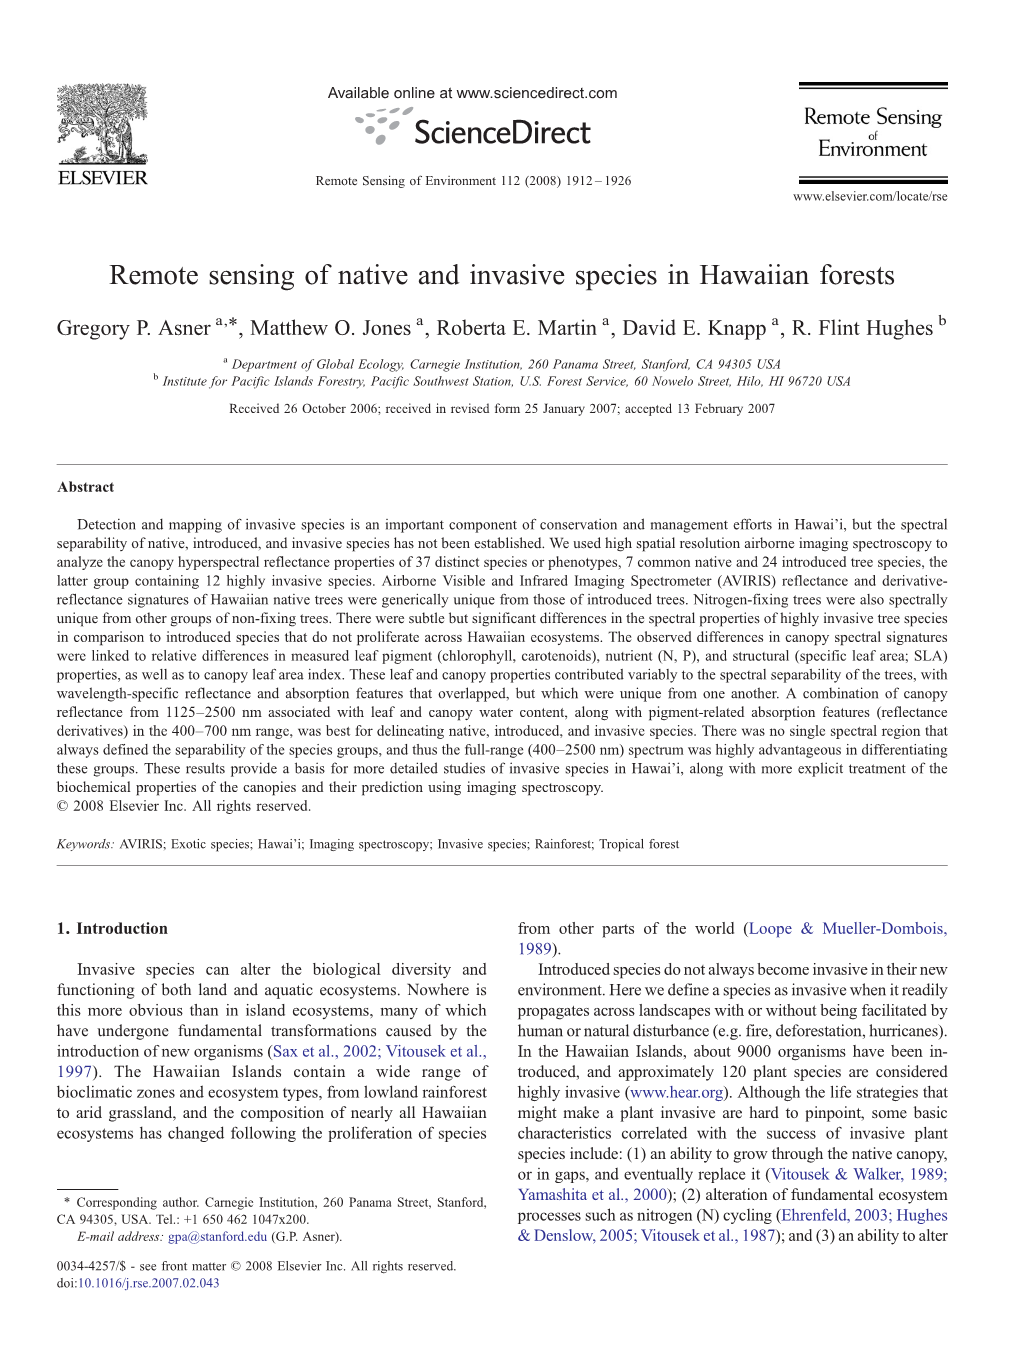 Remote Sensing of Native and Invasive Species in Hawaiian Forests ⁎ Gregory P